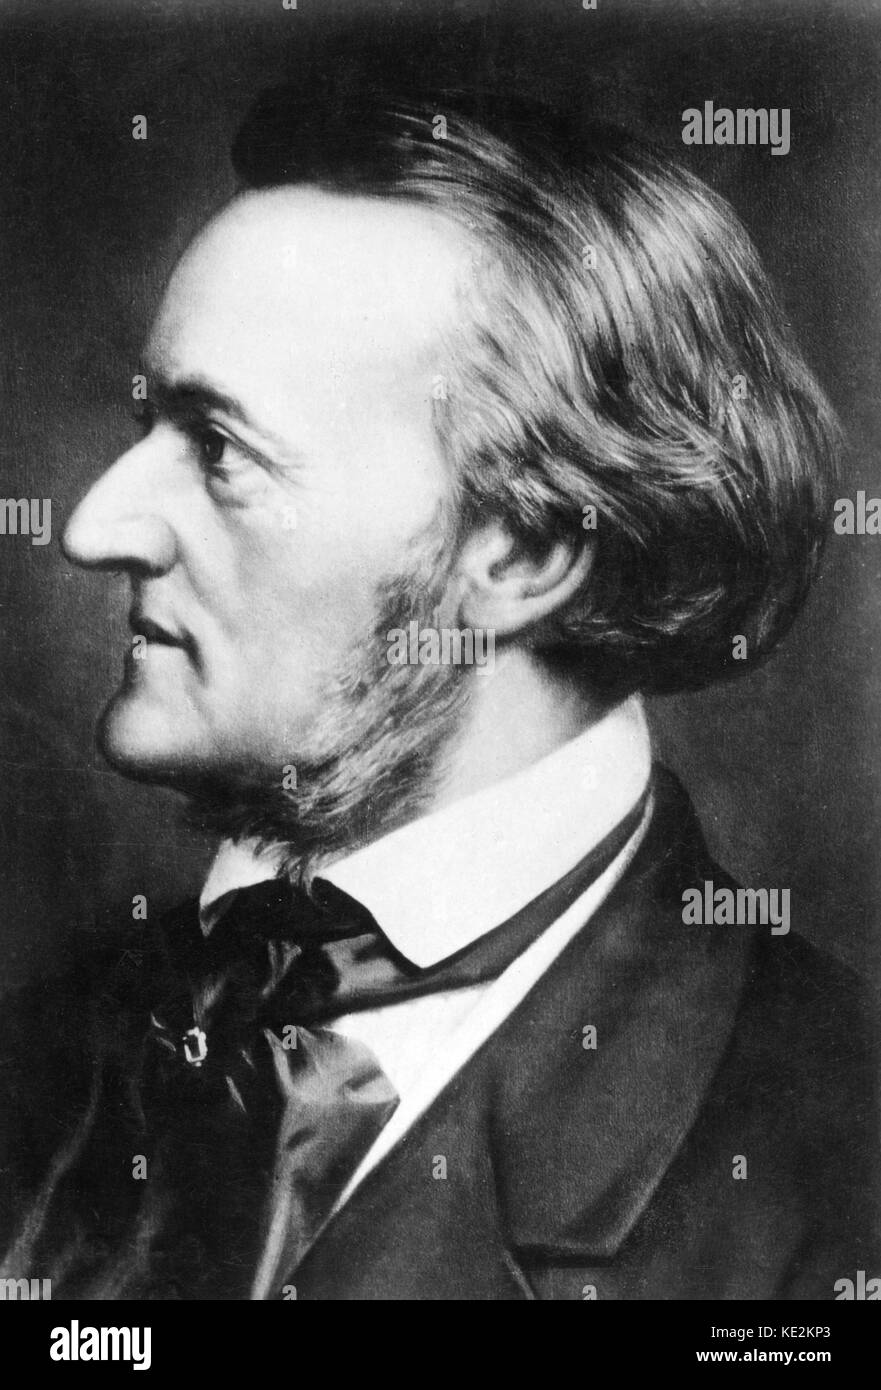 Richard Wagner portrait. Photograph. German composer & author, 22 May 1813 - 13 February 1883. Stock Photo